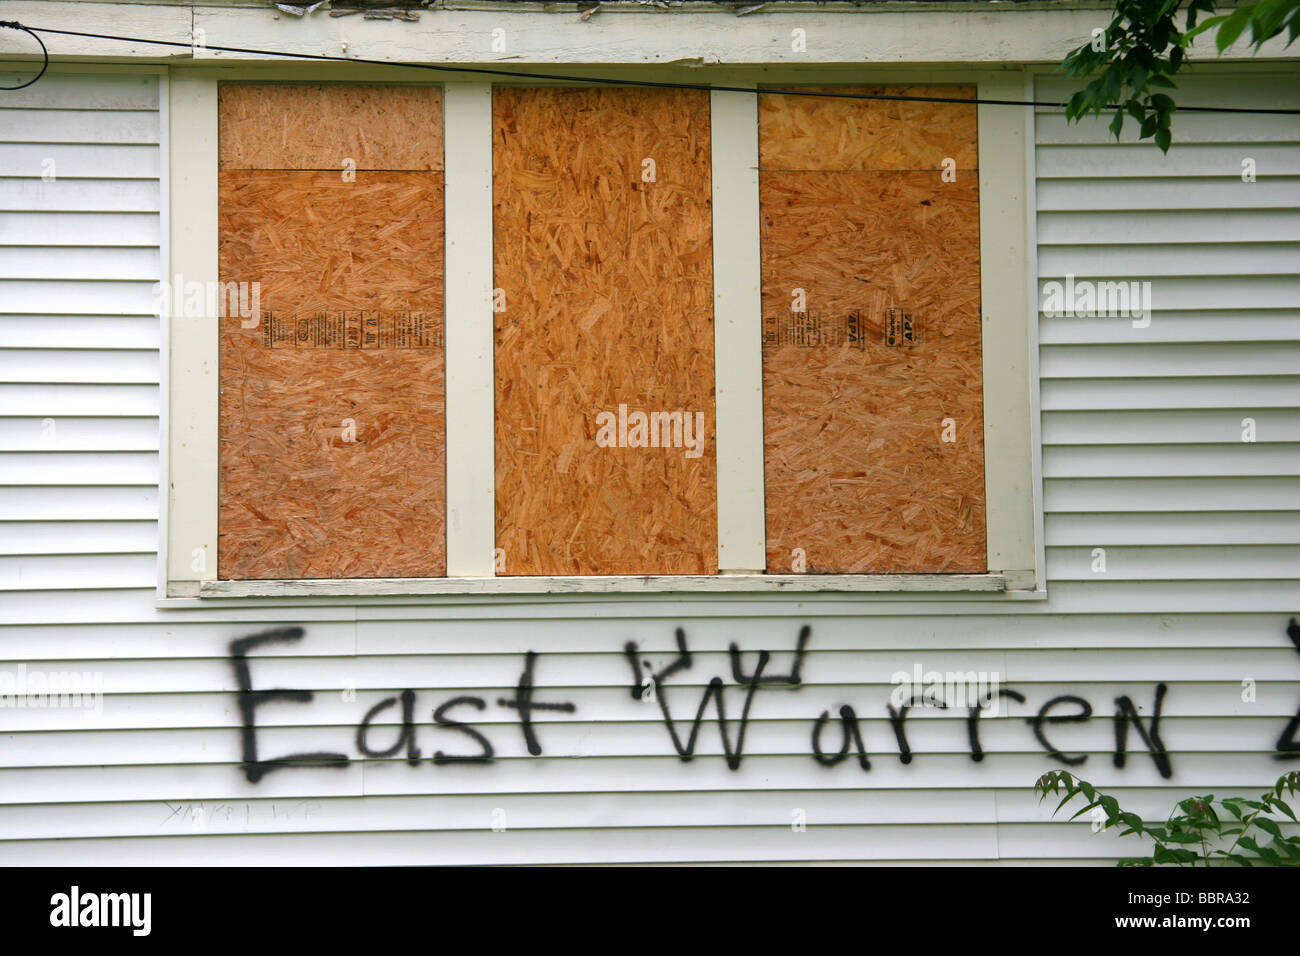 Boarded up house with gang markings and graffiti in Detroit Michigan USA Stock Photo